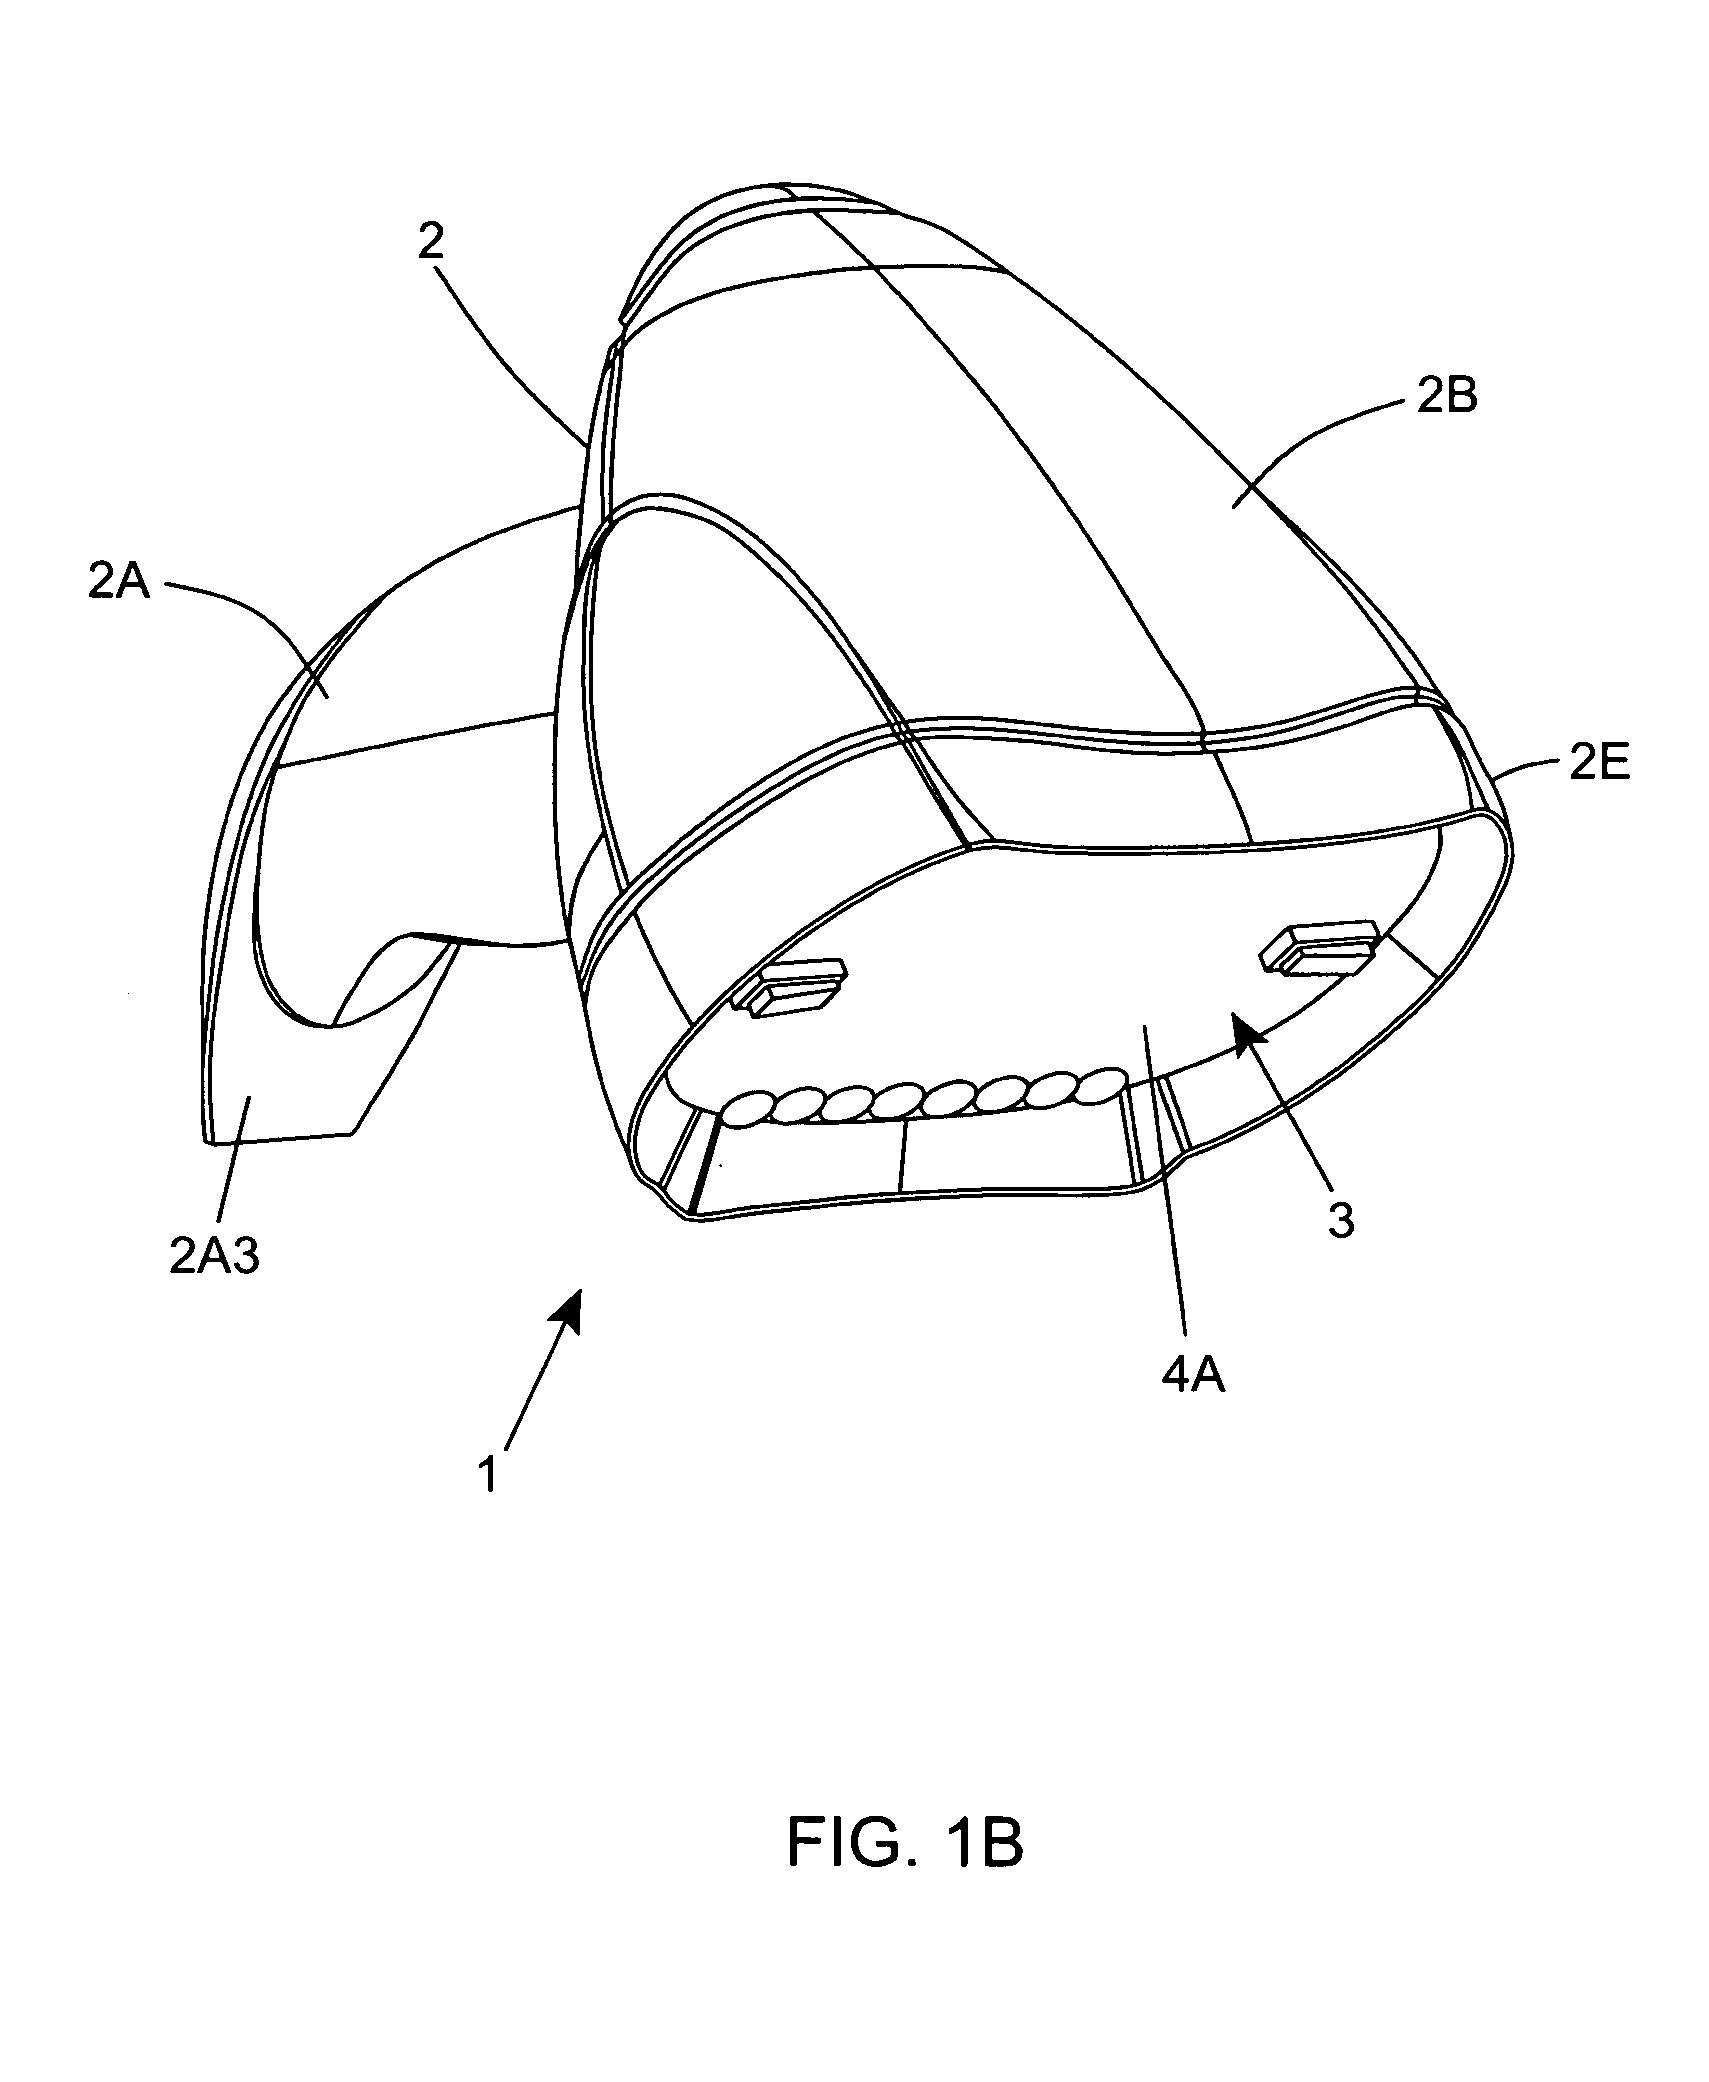 Method of and system for determining the lower limit of decoding resolution in an imaging-based bar code symbol reader